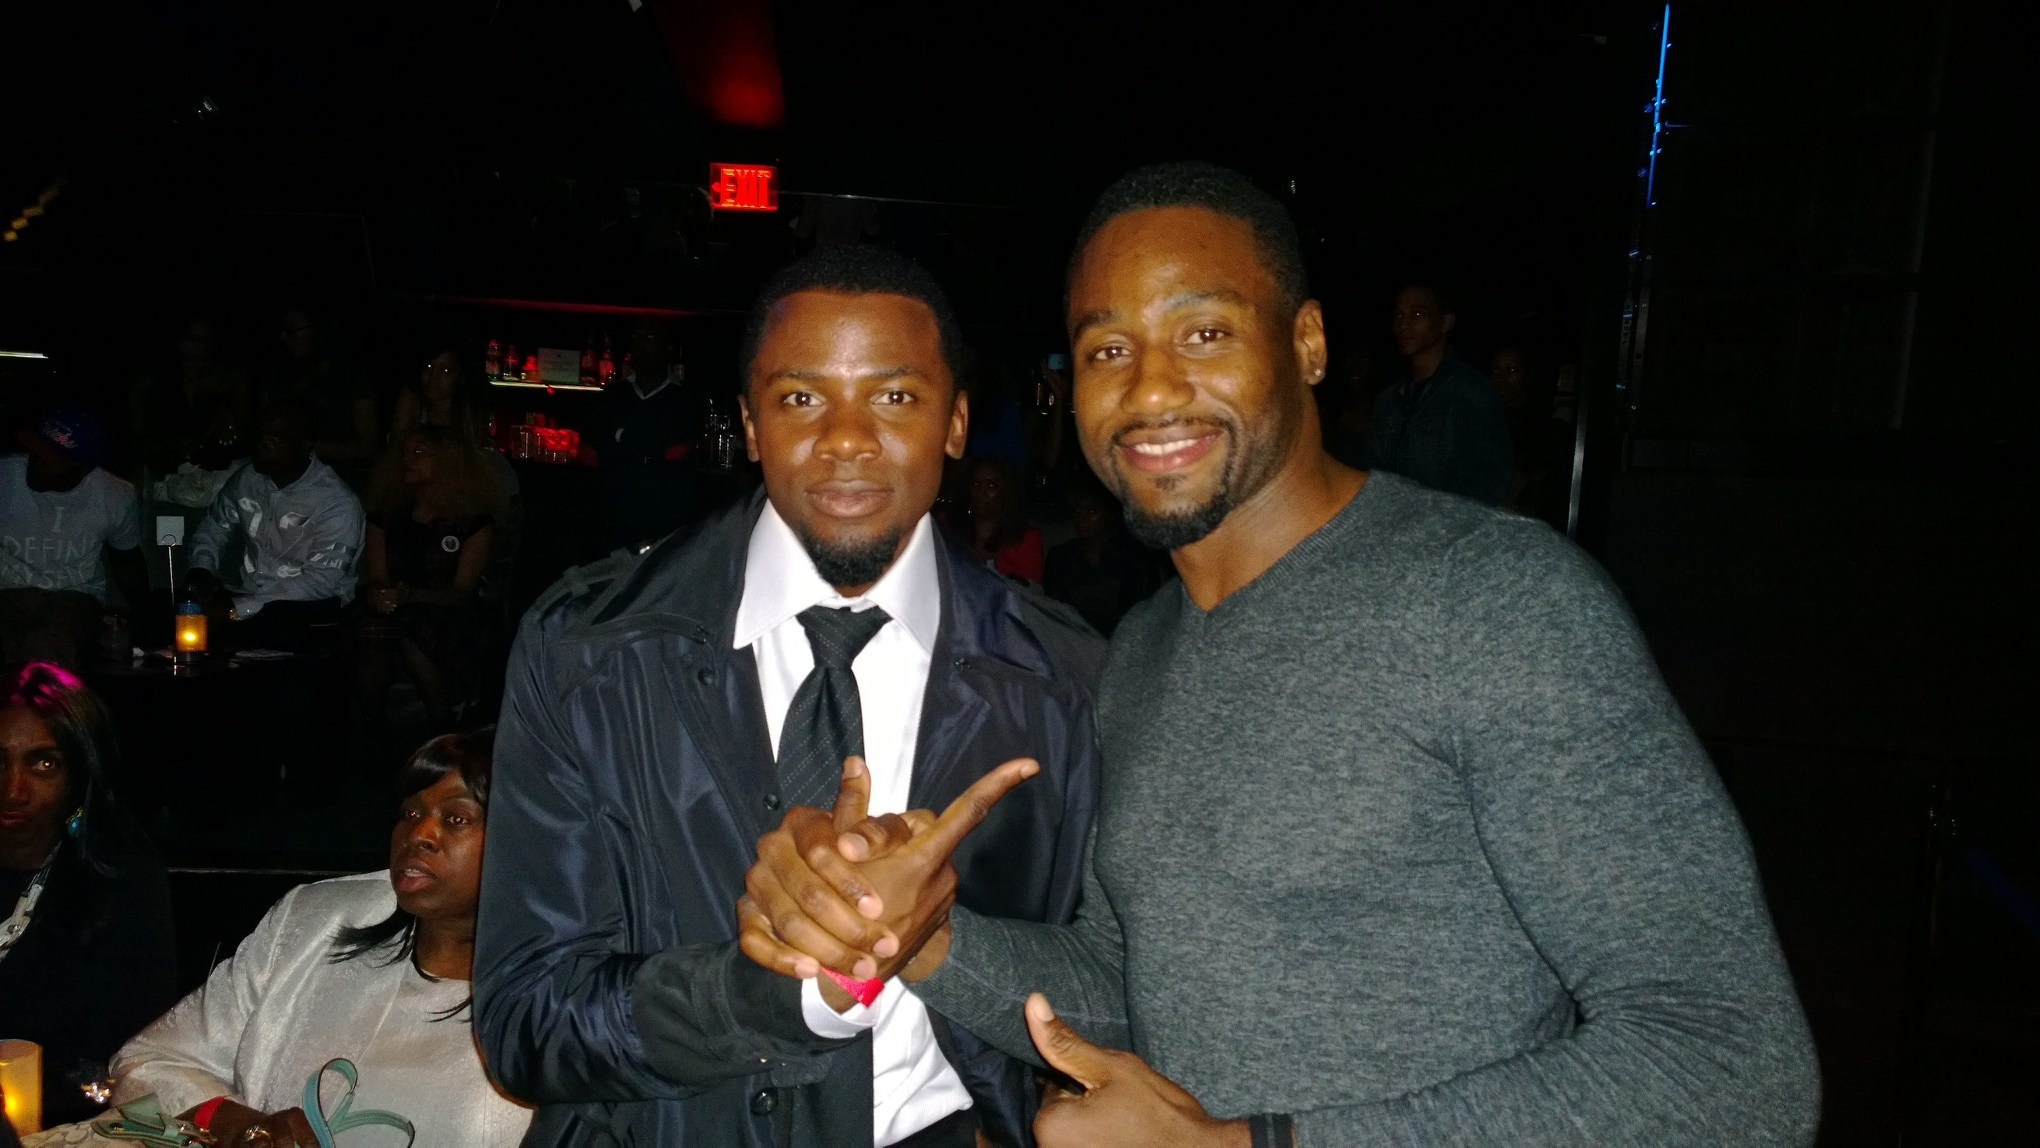 Actor Derek Luke and Yarc Lewinson at Urban Film Festival after party 9/19/13.